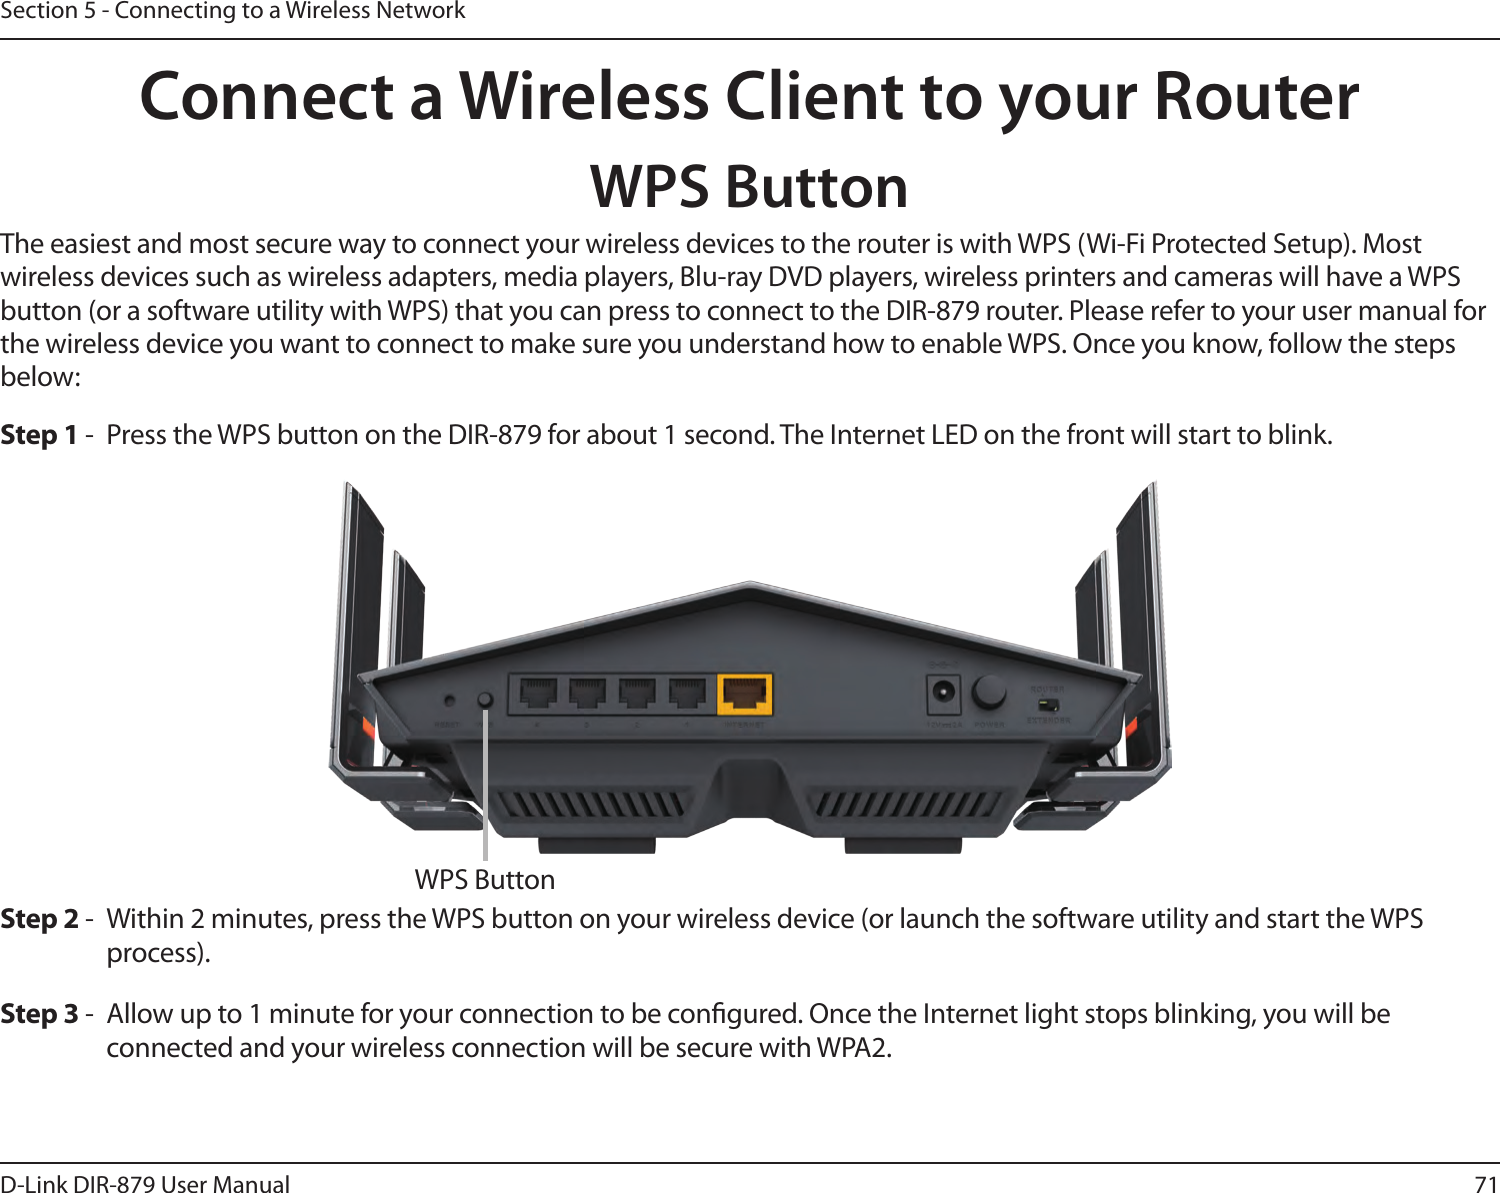 71D-Link DIR-879 User ManualSection 5 - Connecting to a Wireless NetworkConnect a Wireless Client to your RouterWPS ButtonStep 2 -  Within 2 minutes, press the WPS button on your wireless device (or launch the software utility and start the WPS process).The easiest and most secure way to connect your wireless devices to the router is with WPS (Wi-Fi Protected Setup). Most wireless devices such as wireless adapters, media players, Blu-ray DVD players, wireless printers and cameras will have a WPS button (or a software utility with WPS) that you can press to connect to the DIR-879 router. Please refer to your user manual for the wireless device you want to connect to make sure you understand how to enable WPS. Once you know, follow the steps below:Step 1 -  Press the WPS button on the DIR-879 for about 1 second. The Internet LED on the front will start to blink.Step 3 -  Allow up to 1 minute for your connection to be congured. Once the Internet light stops blinking, you will be connected and your wireless connection will be secure with WPA2.WPS Button